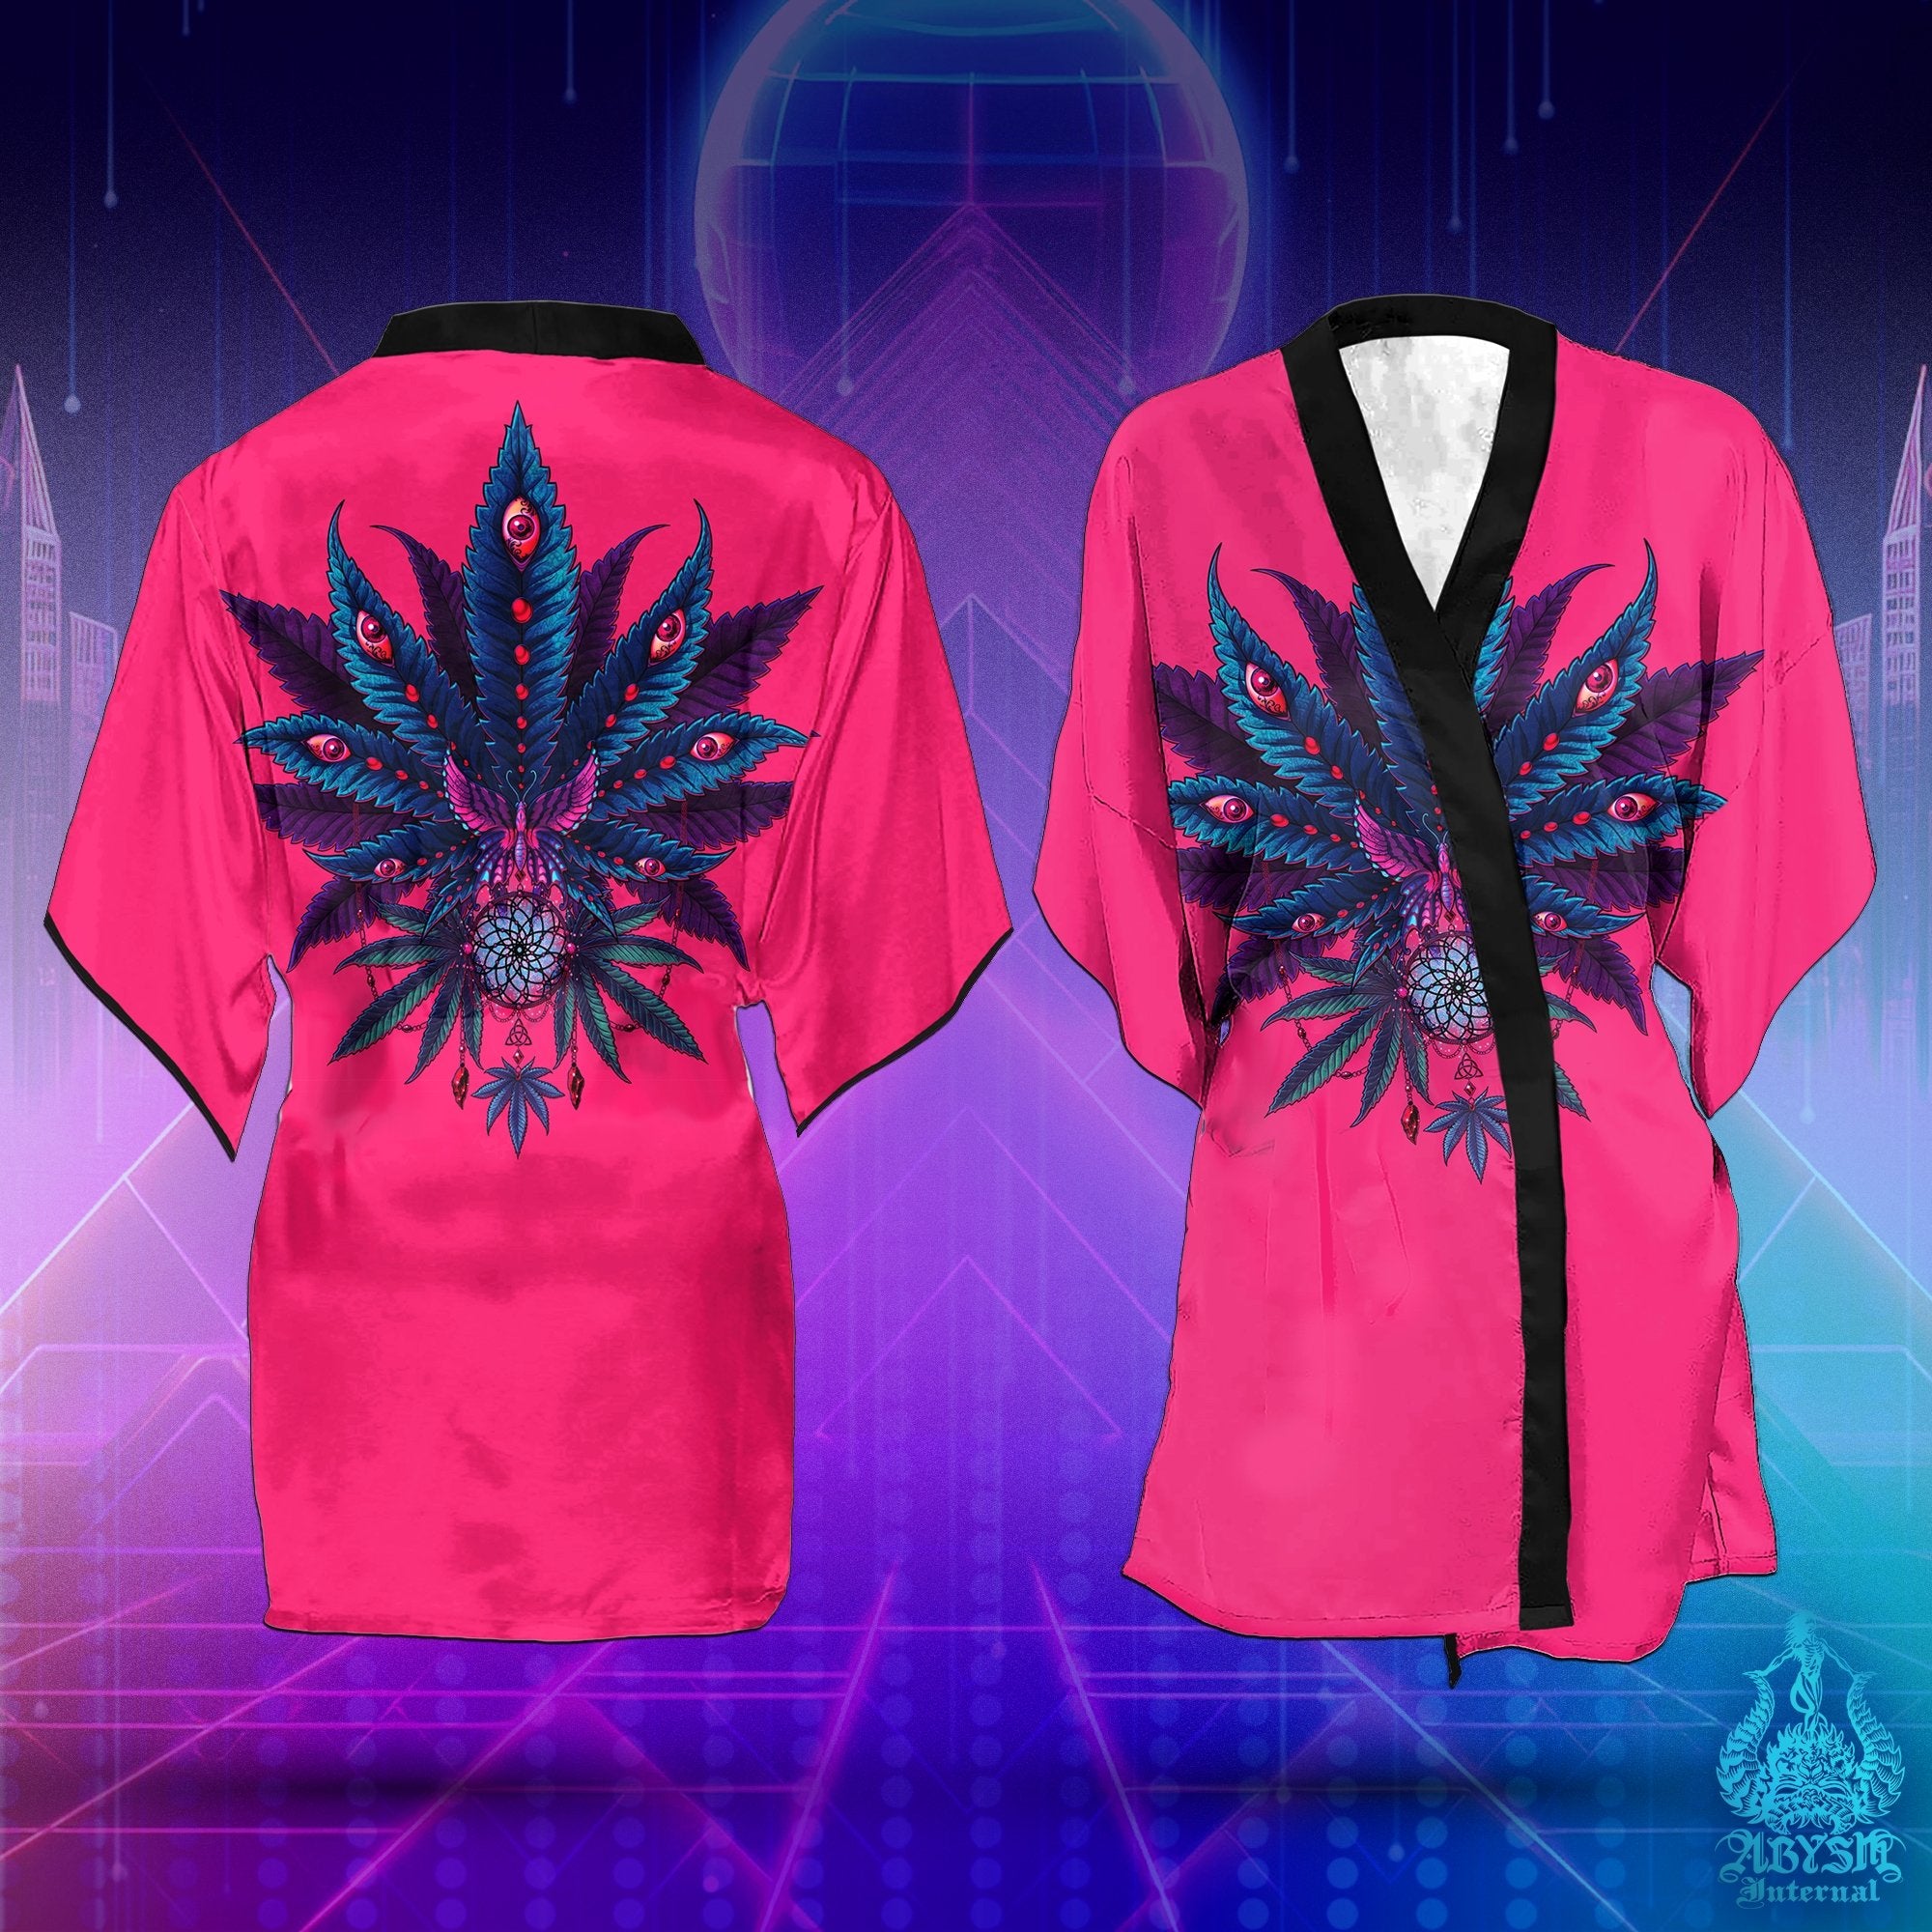 Weed Cover Up, Cannabis Outfit, Neon Party Kimono, Summer Festival Robe, 420 Gift, Alternative Clothing, Unisex - Marijuana I - Abysm Internal